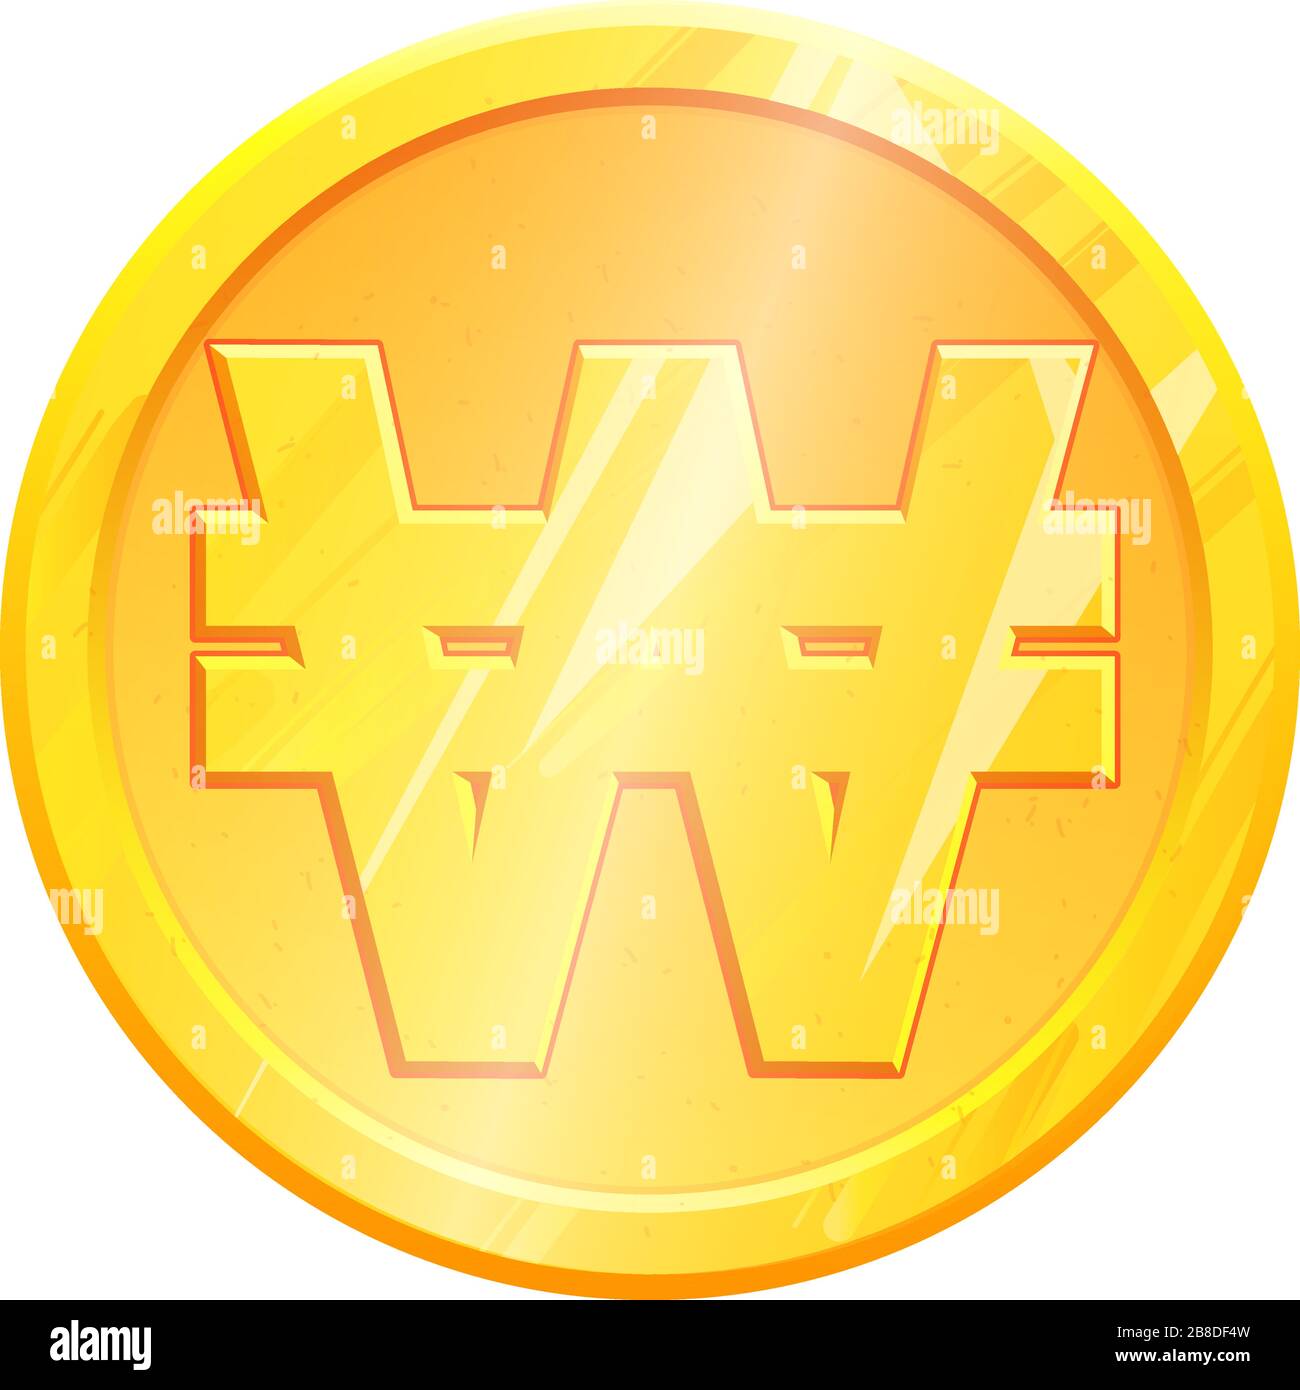 KRW Golden won coin symbol on white background. Finance investment concept. Exchange South Korean currency Money banking illustration. Business income earnings. Financial sign stock vector. Stock Vector